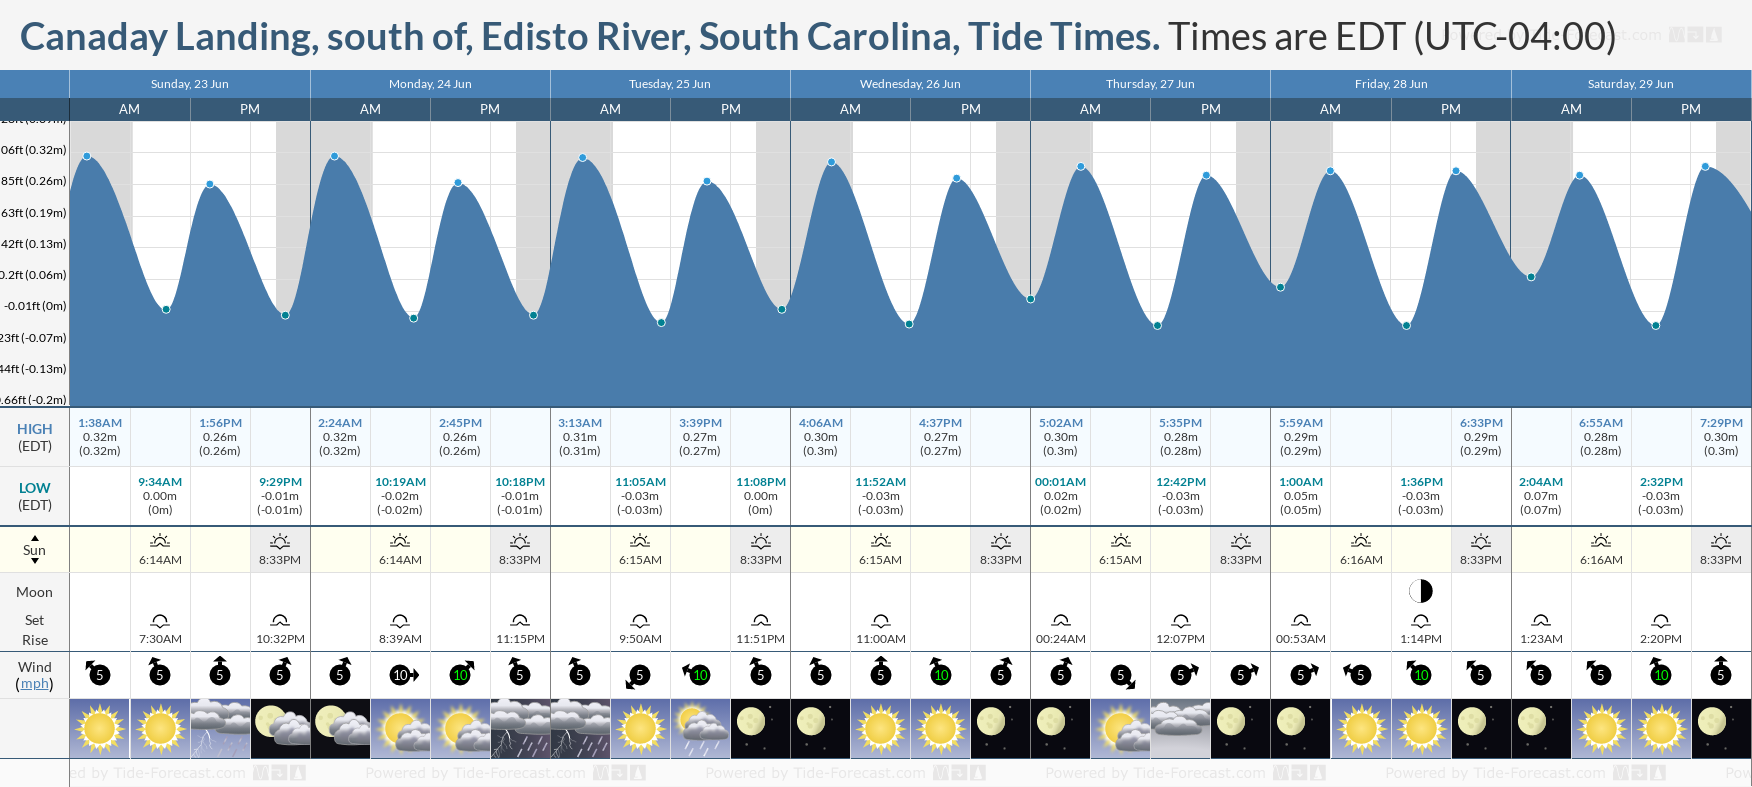 Tide Times and Tide Chart for Canaday Landing, south of, Edisto River